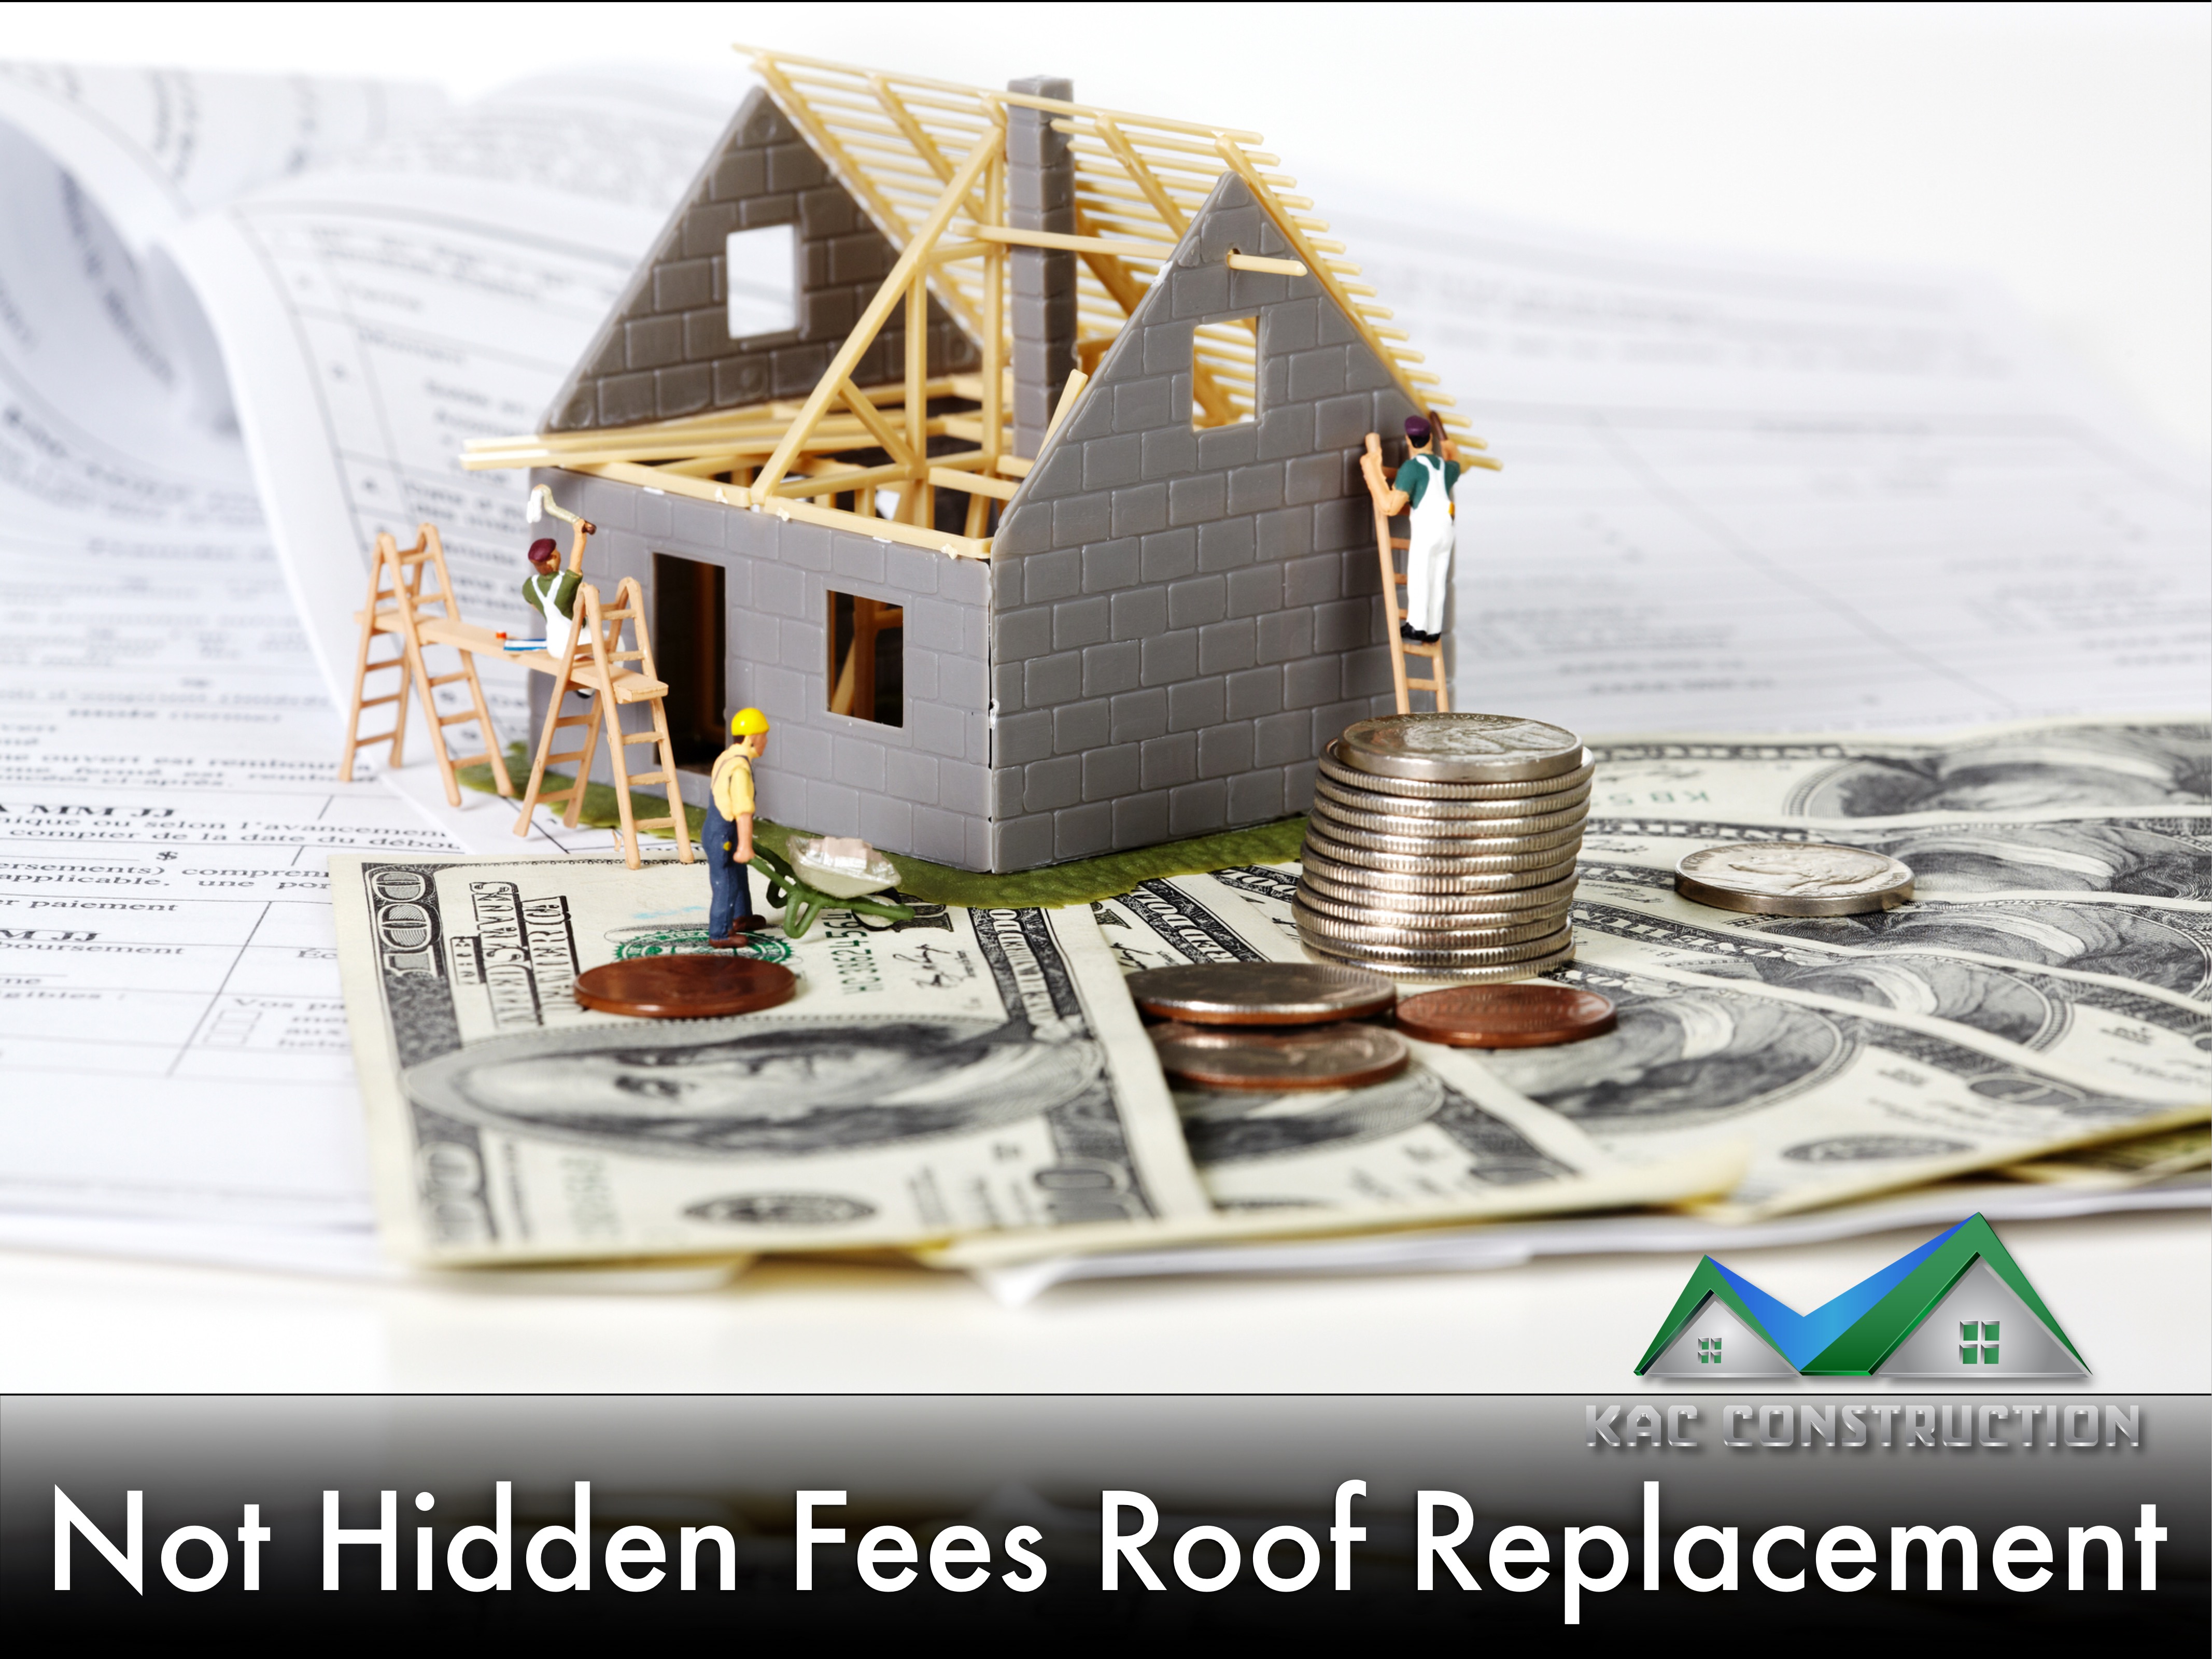 Roofing loan ri, roofing companies ri, roofing companies loan, roofing companies loan ri, roofing loan in ri